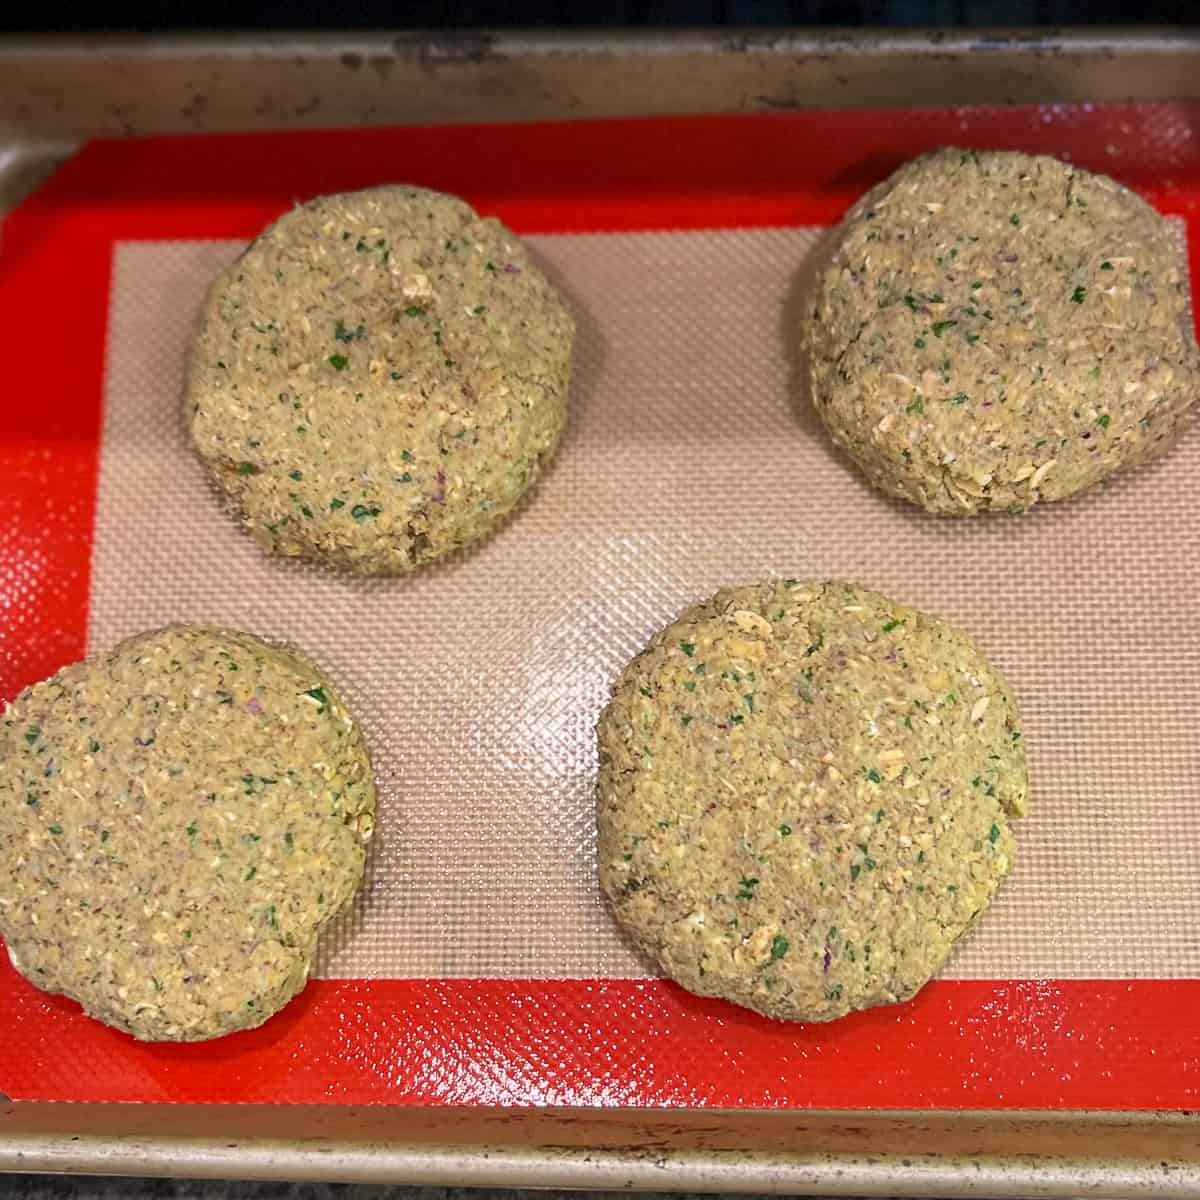 Four chickpea patty burgers on a silicone-lined mat in a baking sheet.